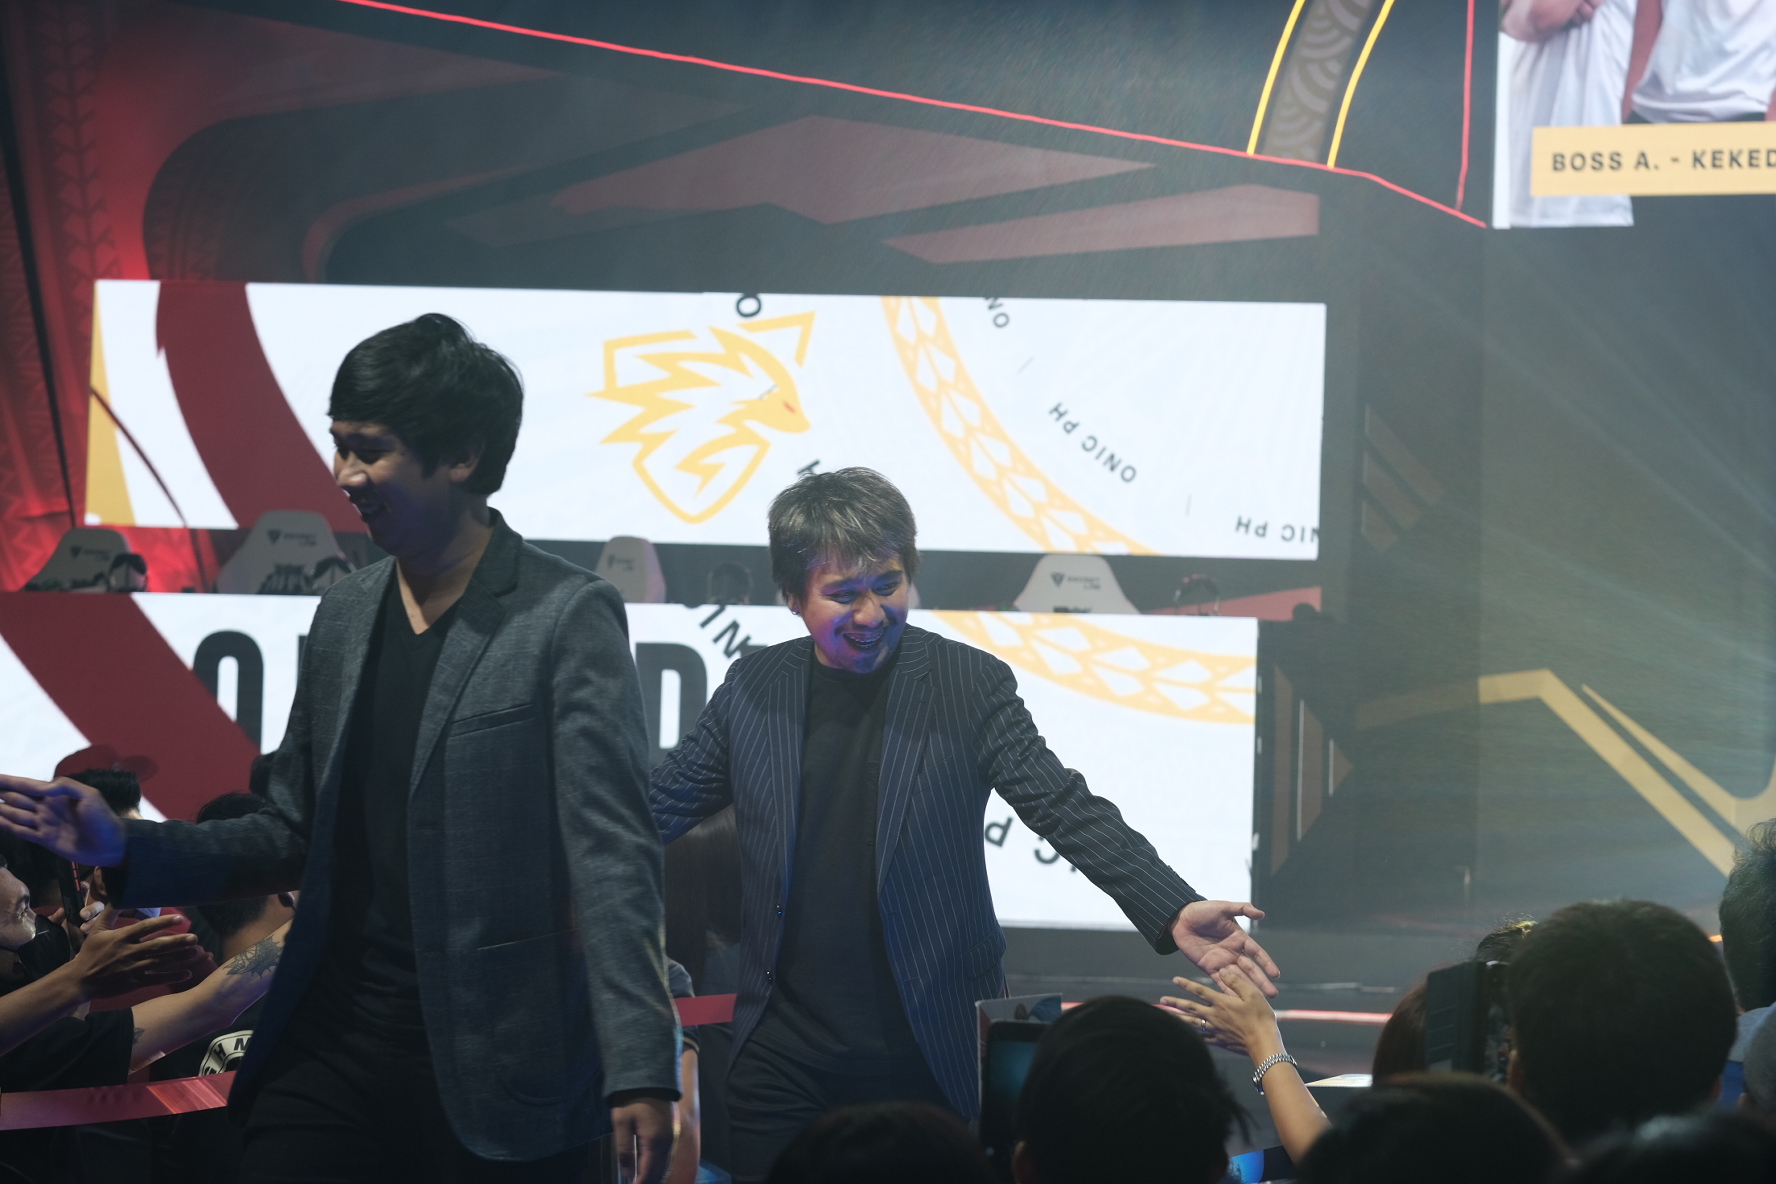 MPL-PH-11-Onic-def-TNC-Bluffzy-2-1 Bluffzy relieved as ONIC PH finally scores first win over TNC since Season 10 ESports Mobile Legends MPL-PH News  - philippine sports news